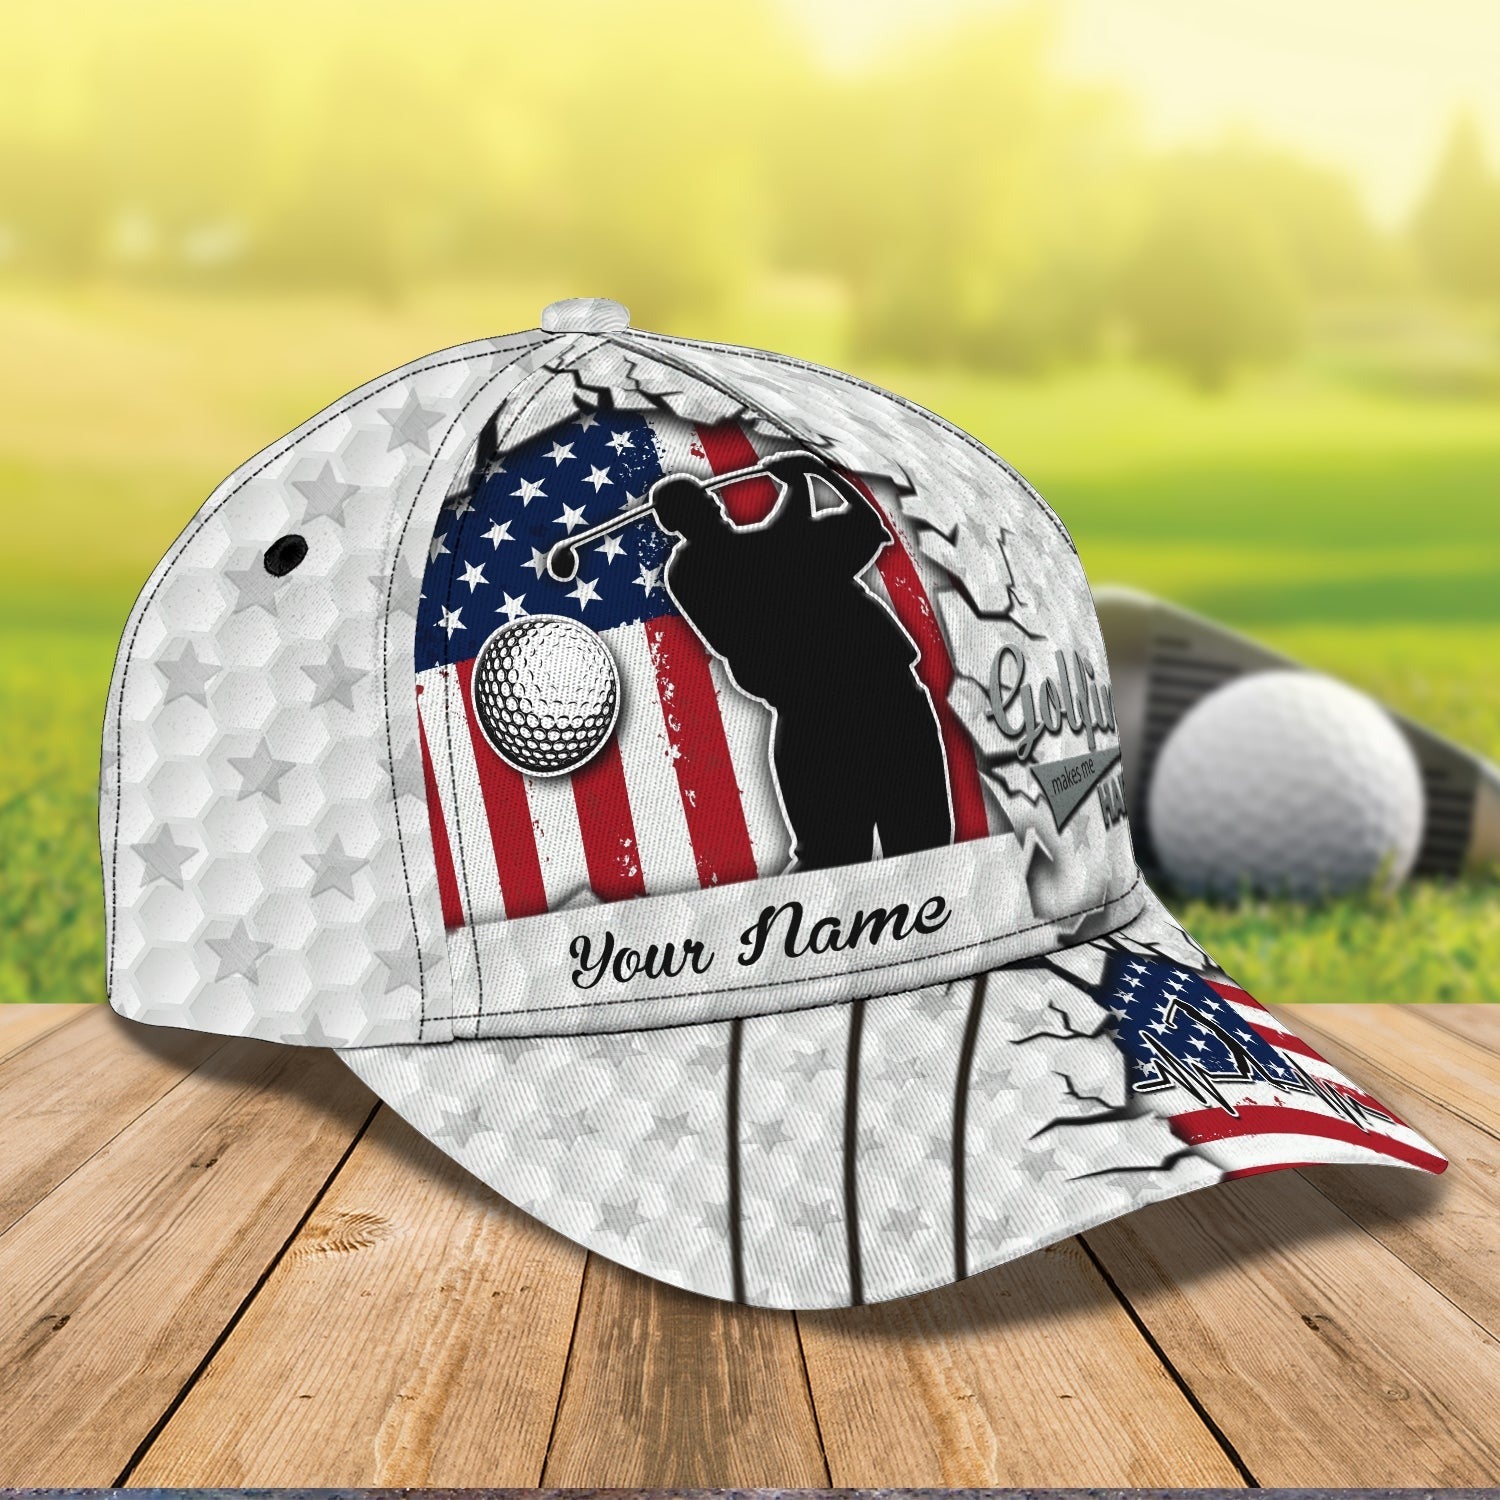 Personalized Golfing Baseball Cap 3D Hat For Men And Woman/ Golfing Make Me Happy/ Golf 3D Cap Hat